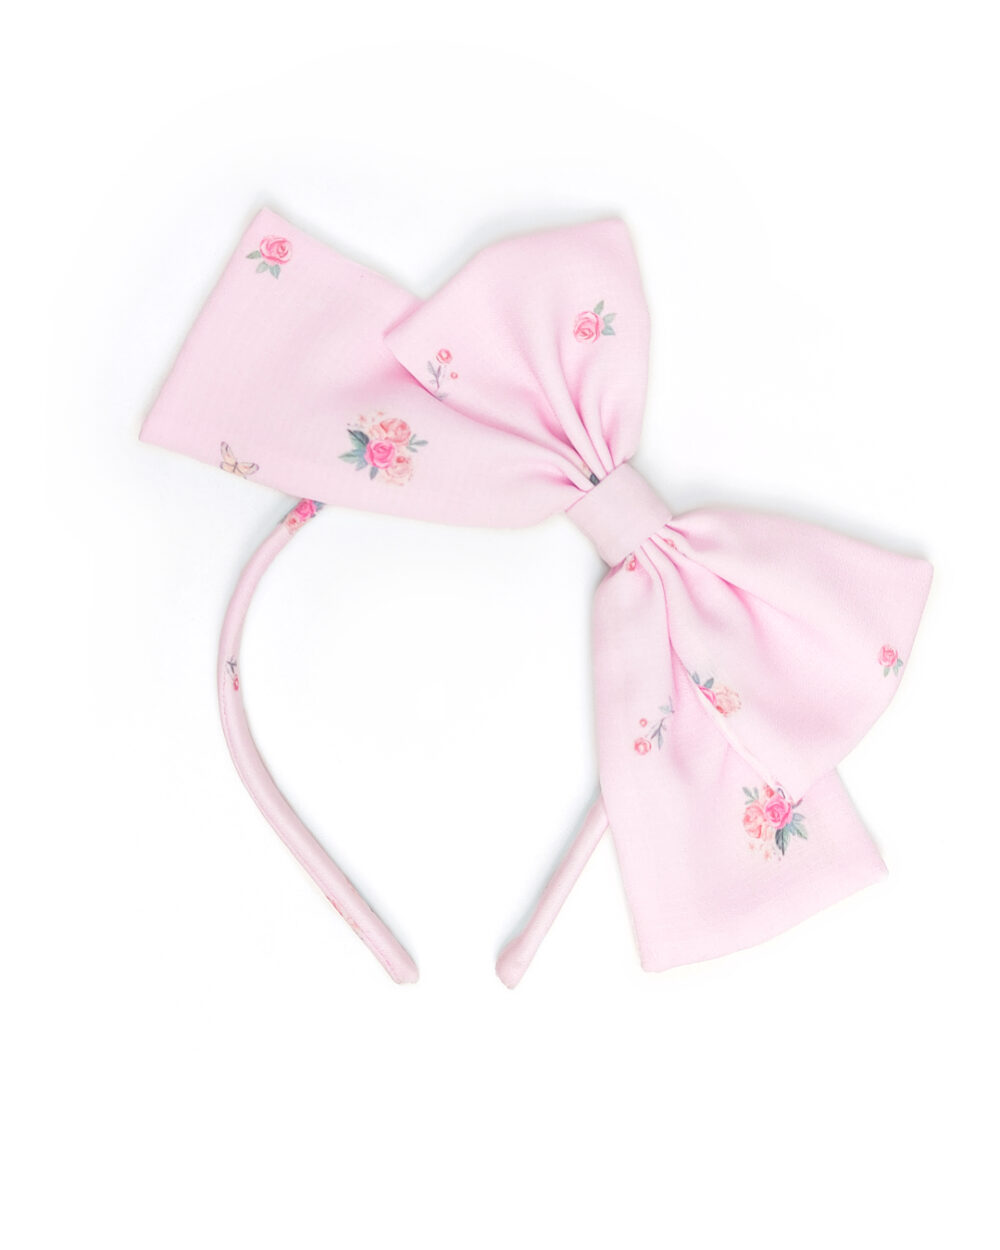 Pink headbow accessory printed with flowers by melikestea